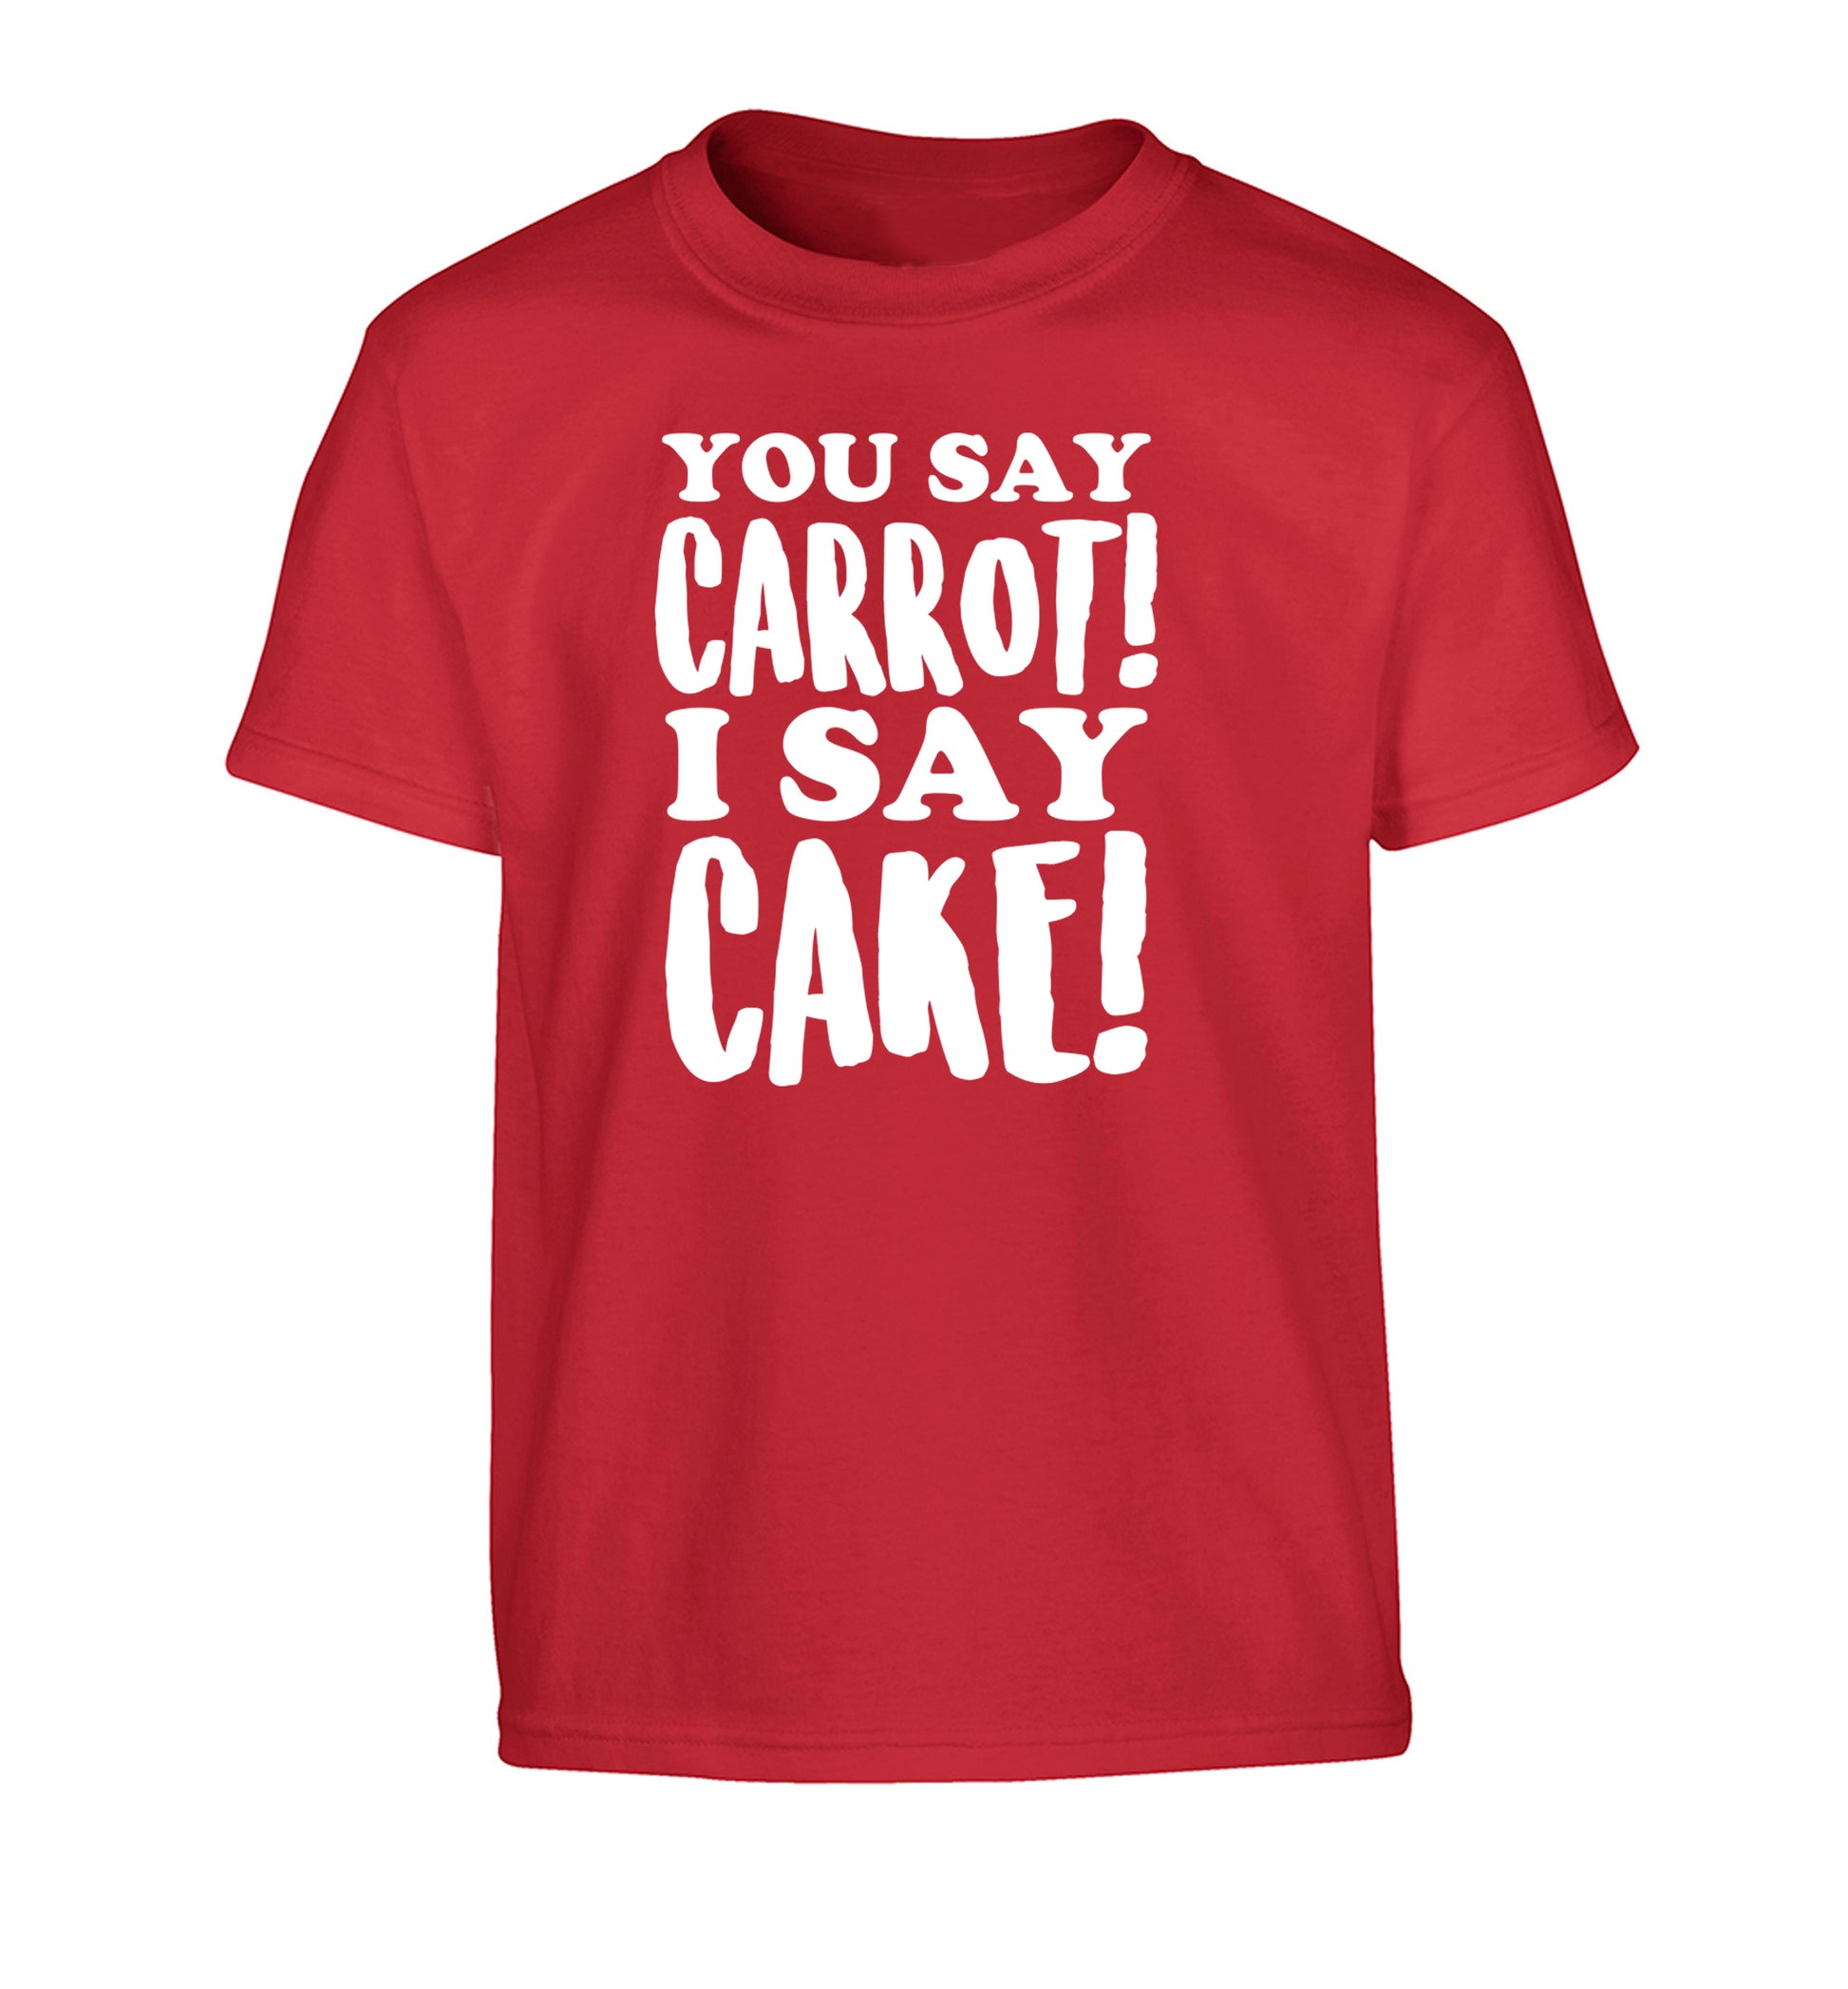 You say carrot I say cake! Children's red Tshirt 12-14 Years